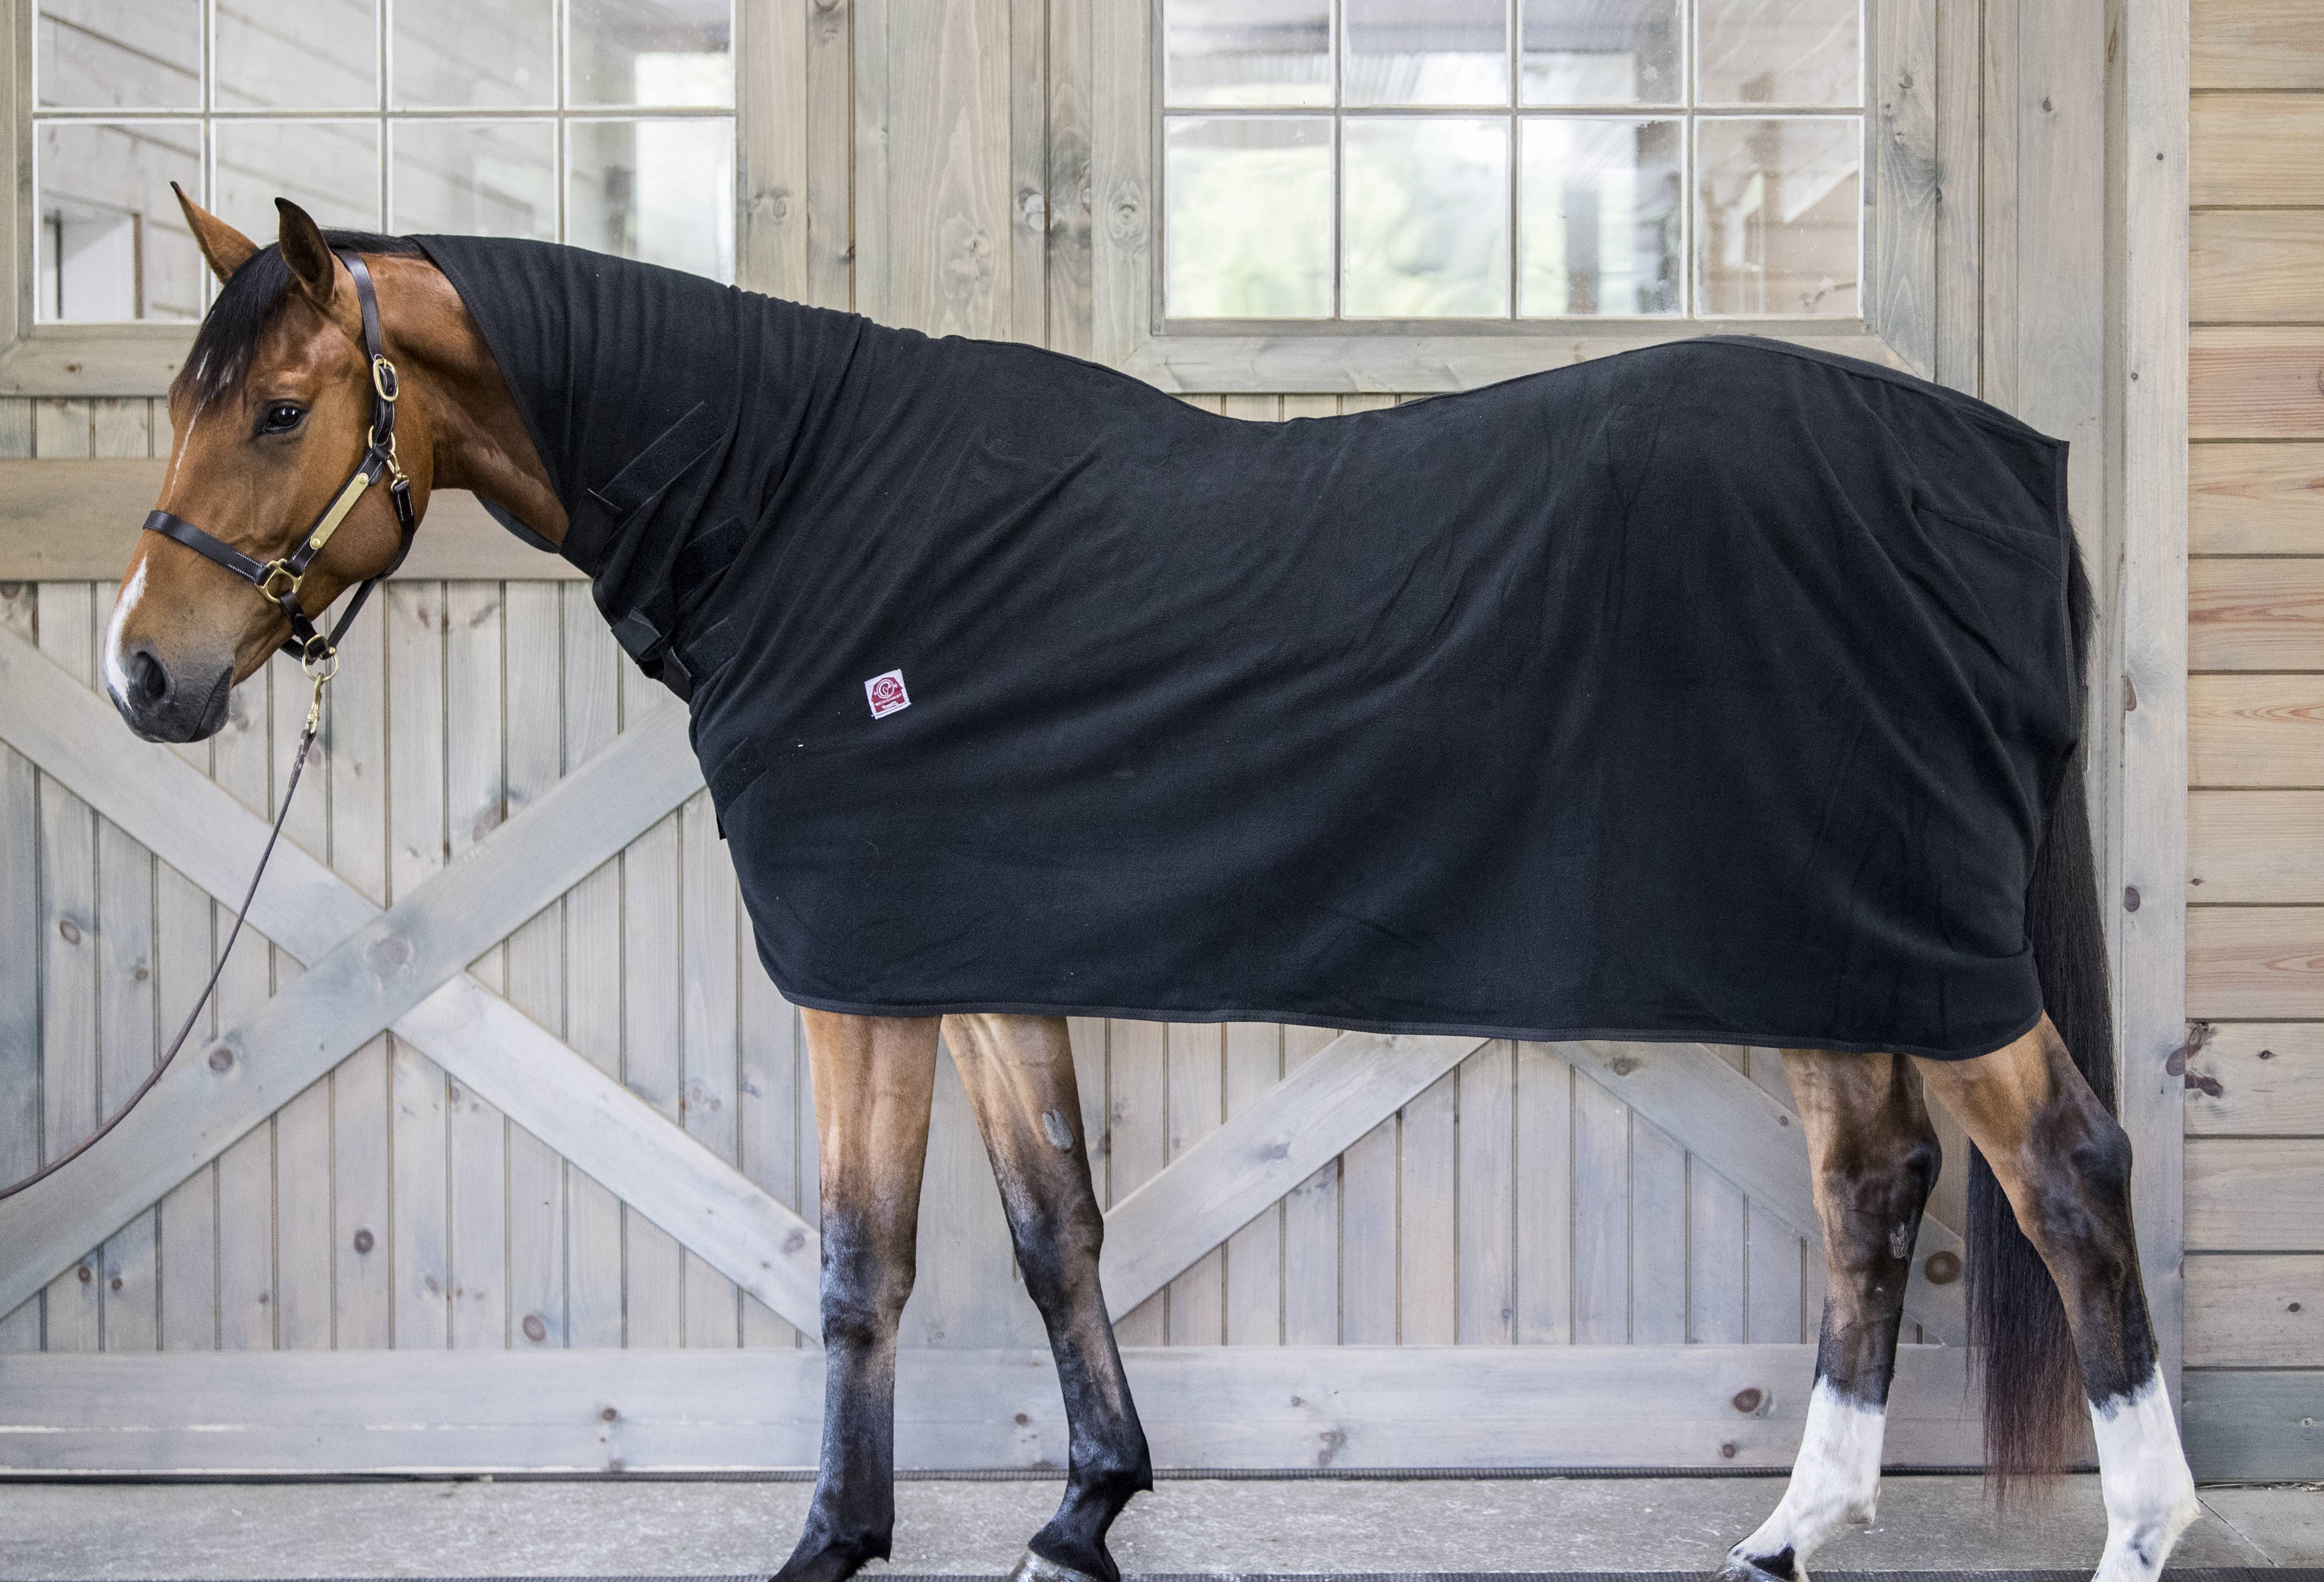 WikSmart Premium Cooler - Dry Your Horse in Half the Time!